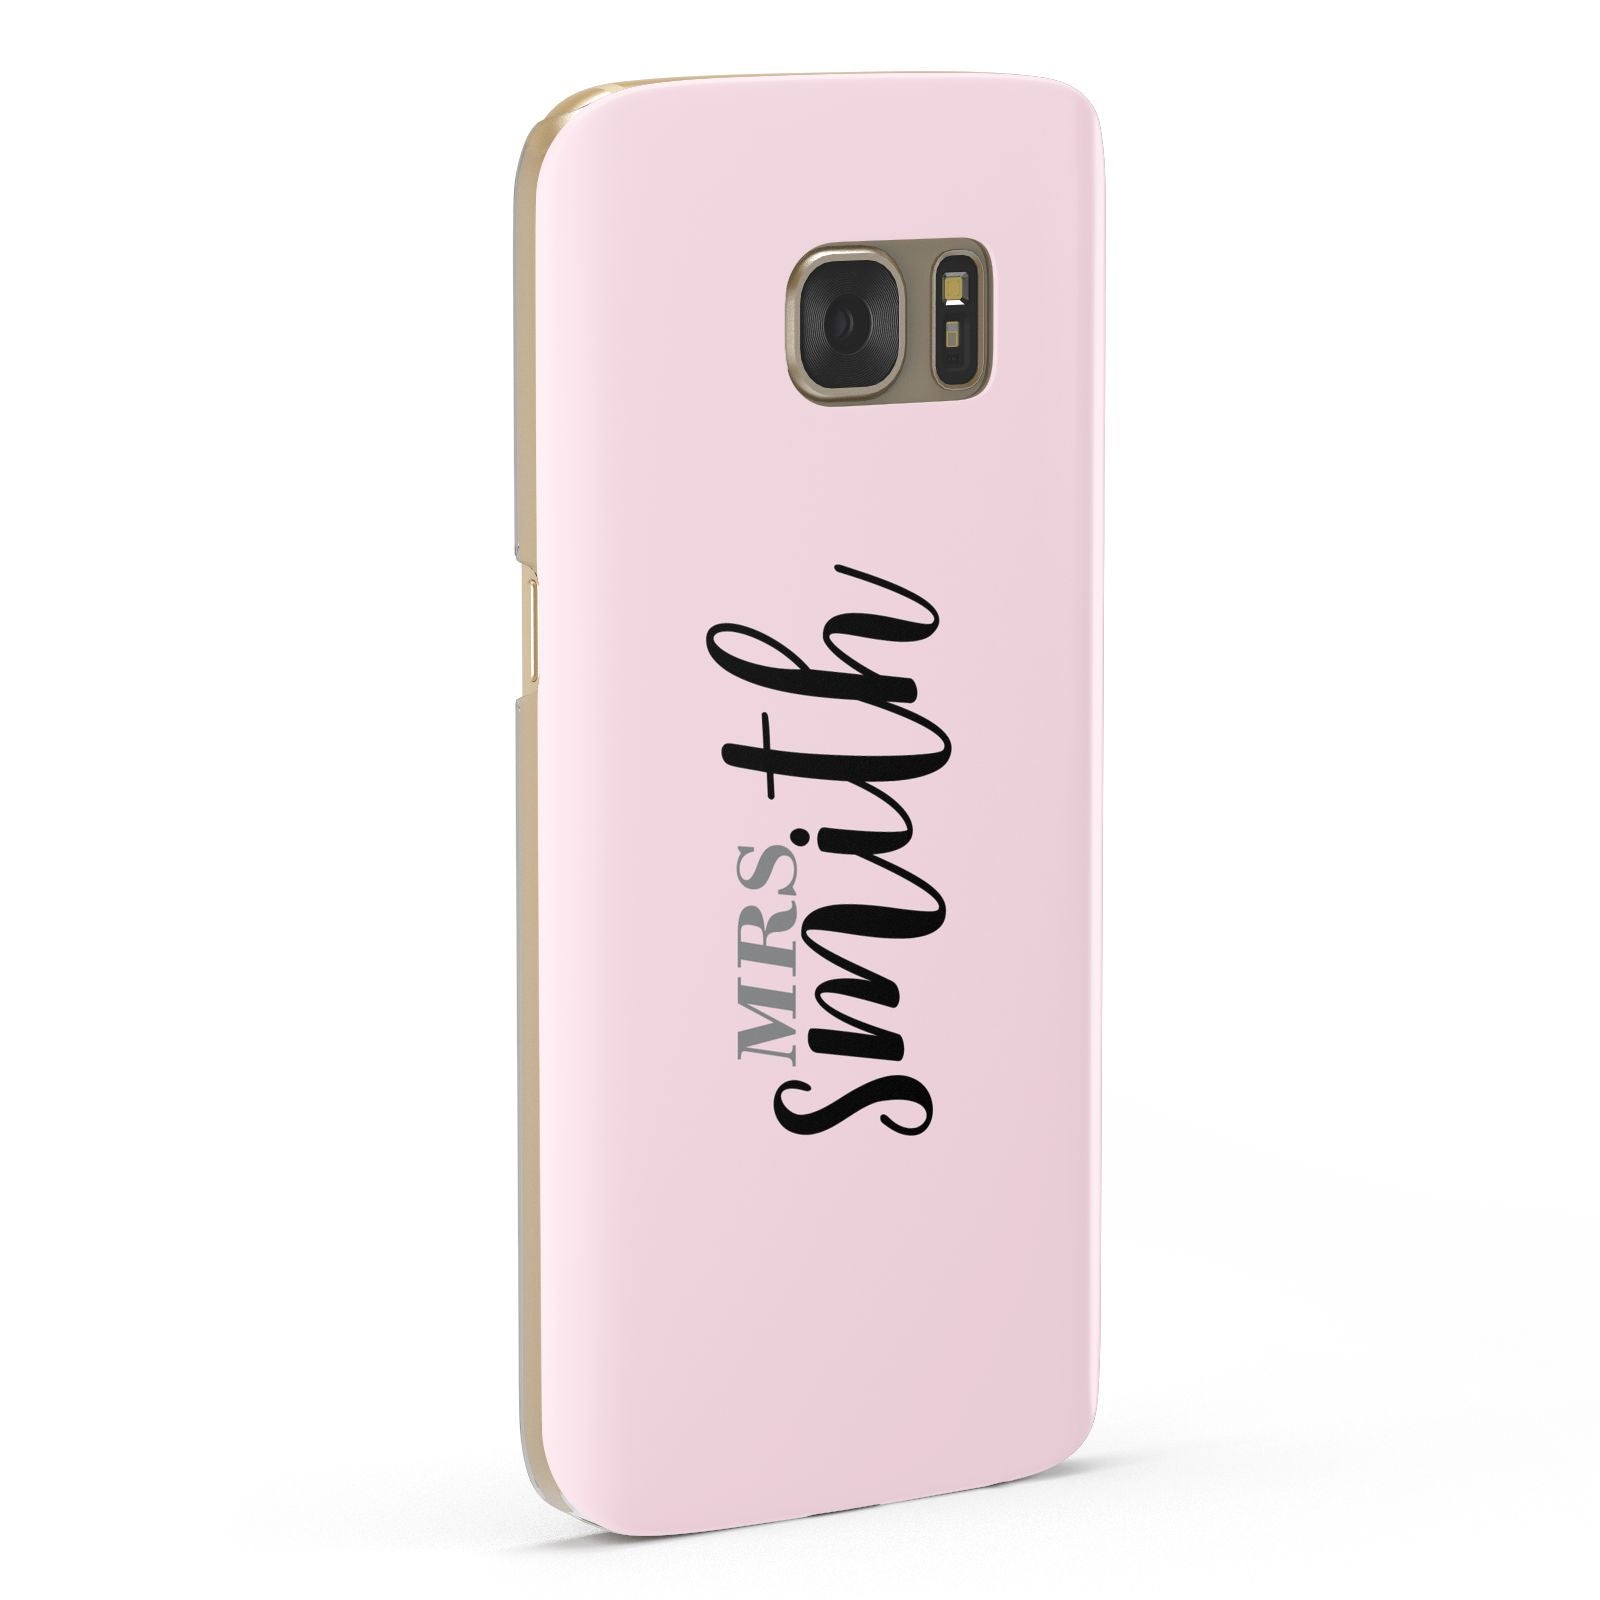 Personalised Bridal Samsung Galaxy Case Fourty Five Degrees